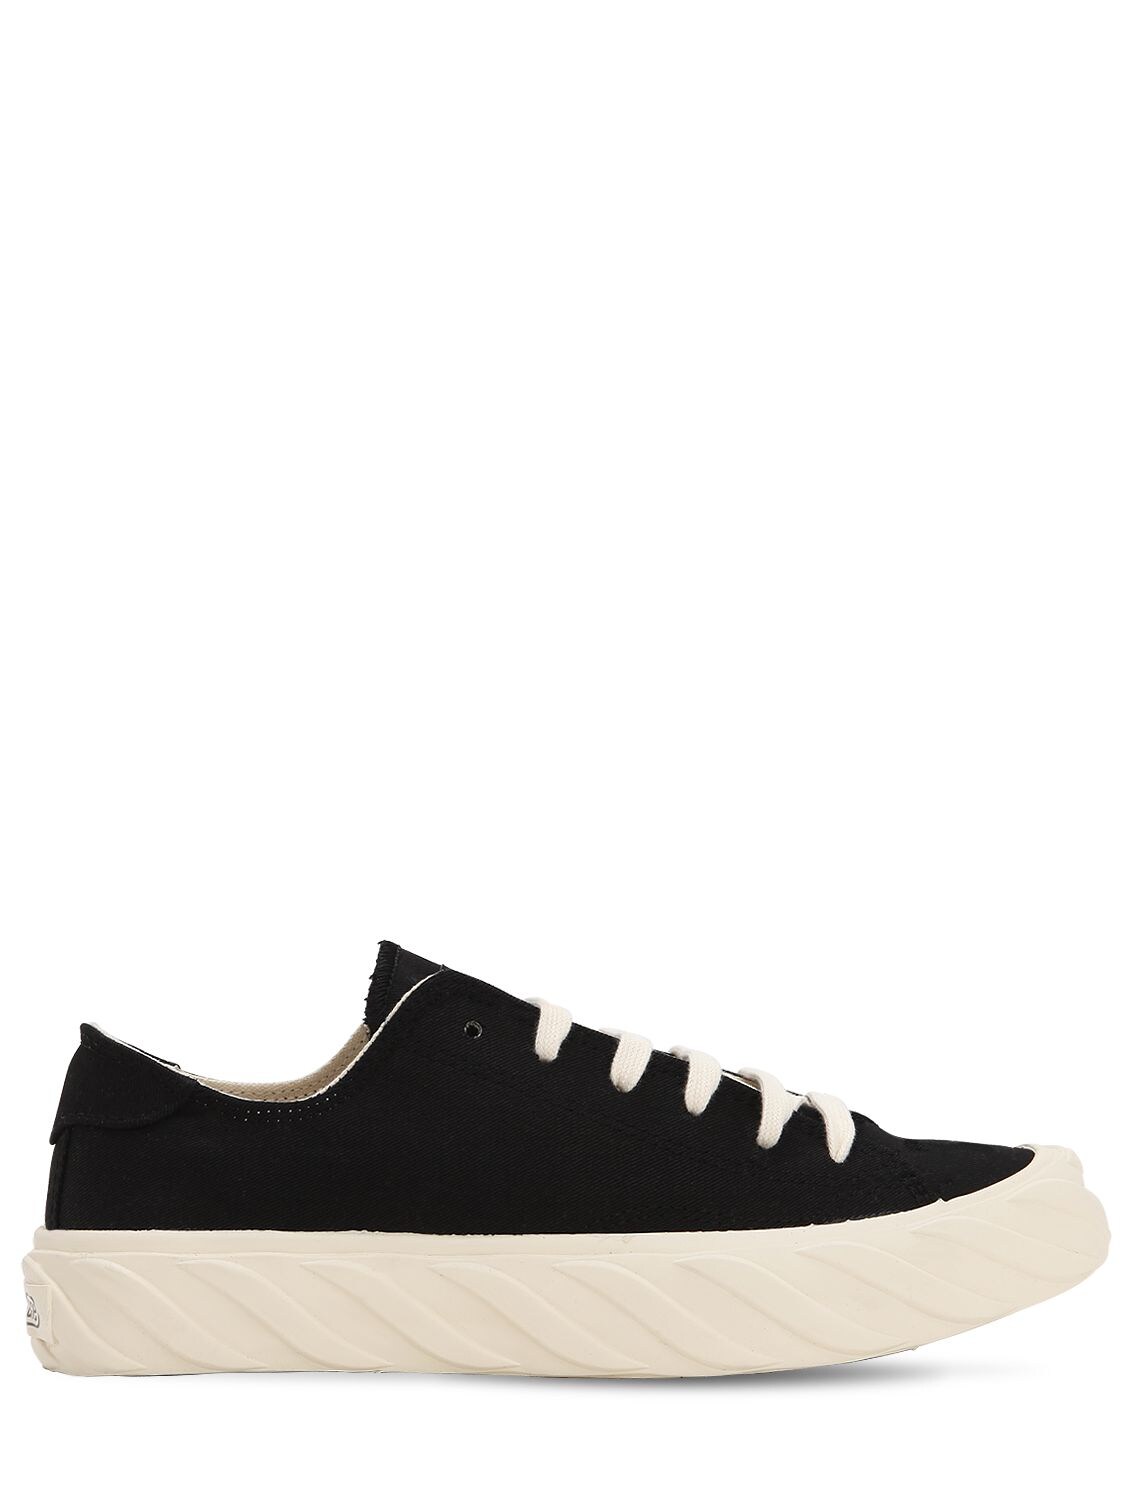 Age - Across To Genuine Era Age Cut Cotton Canvas Trainers In Black